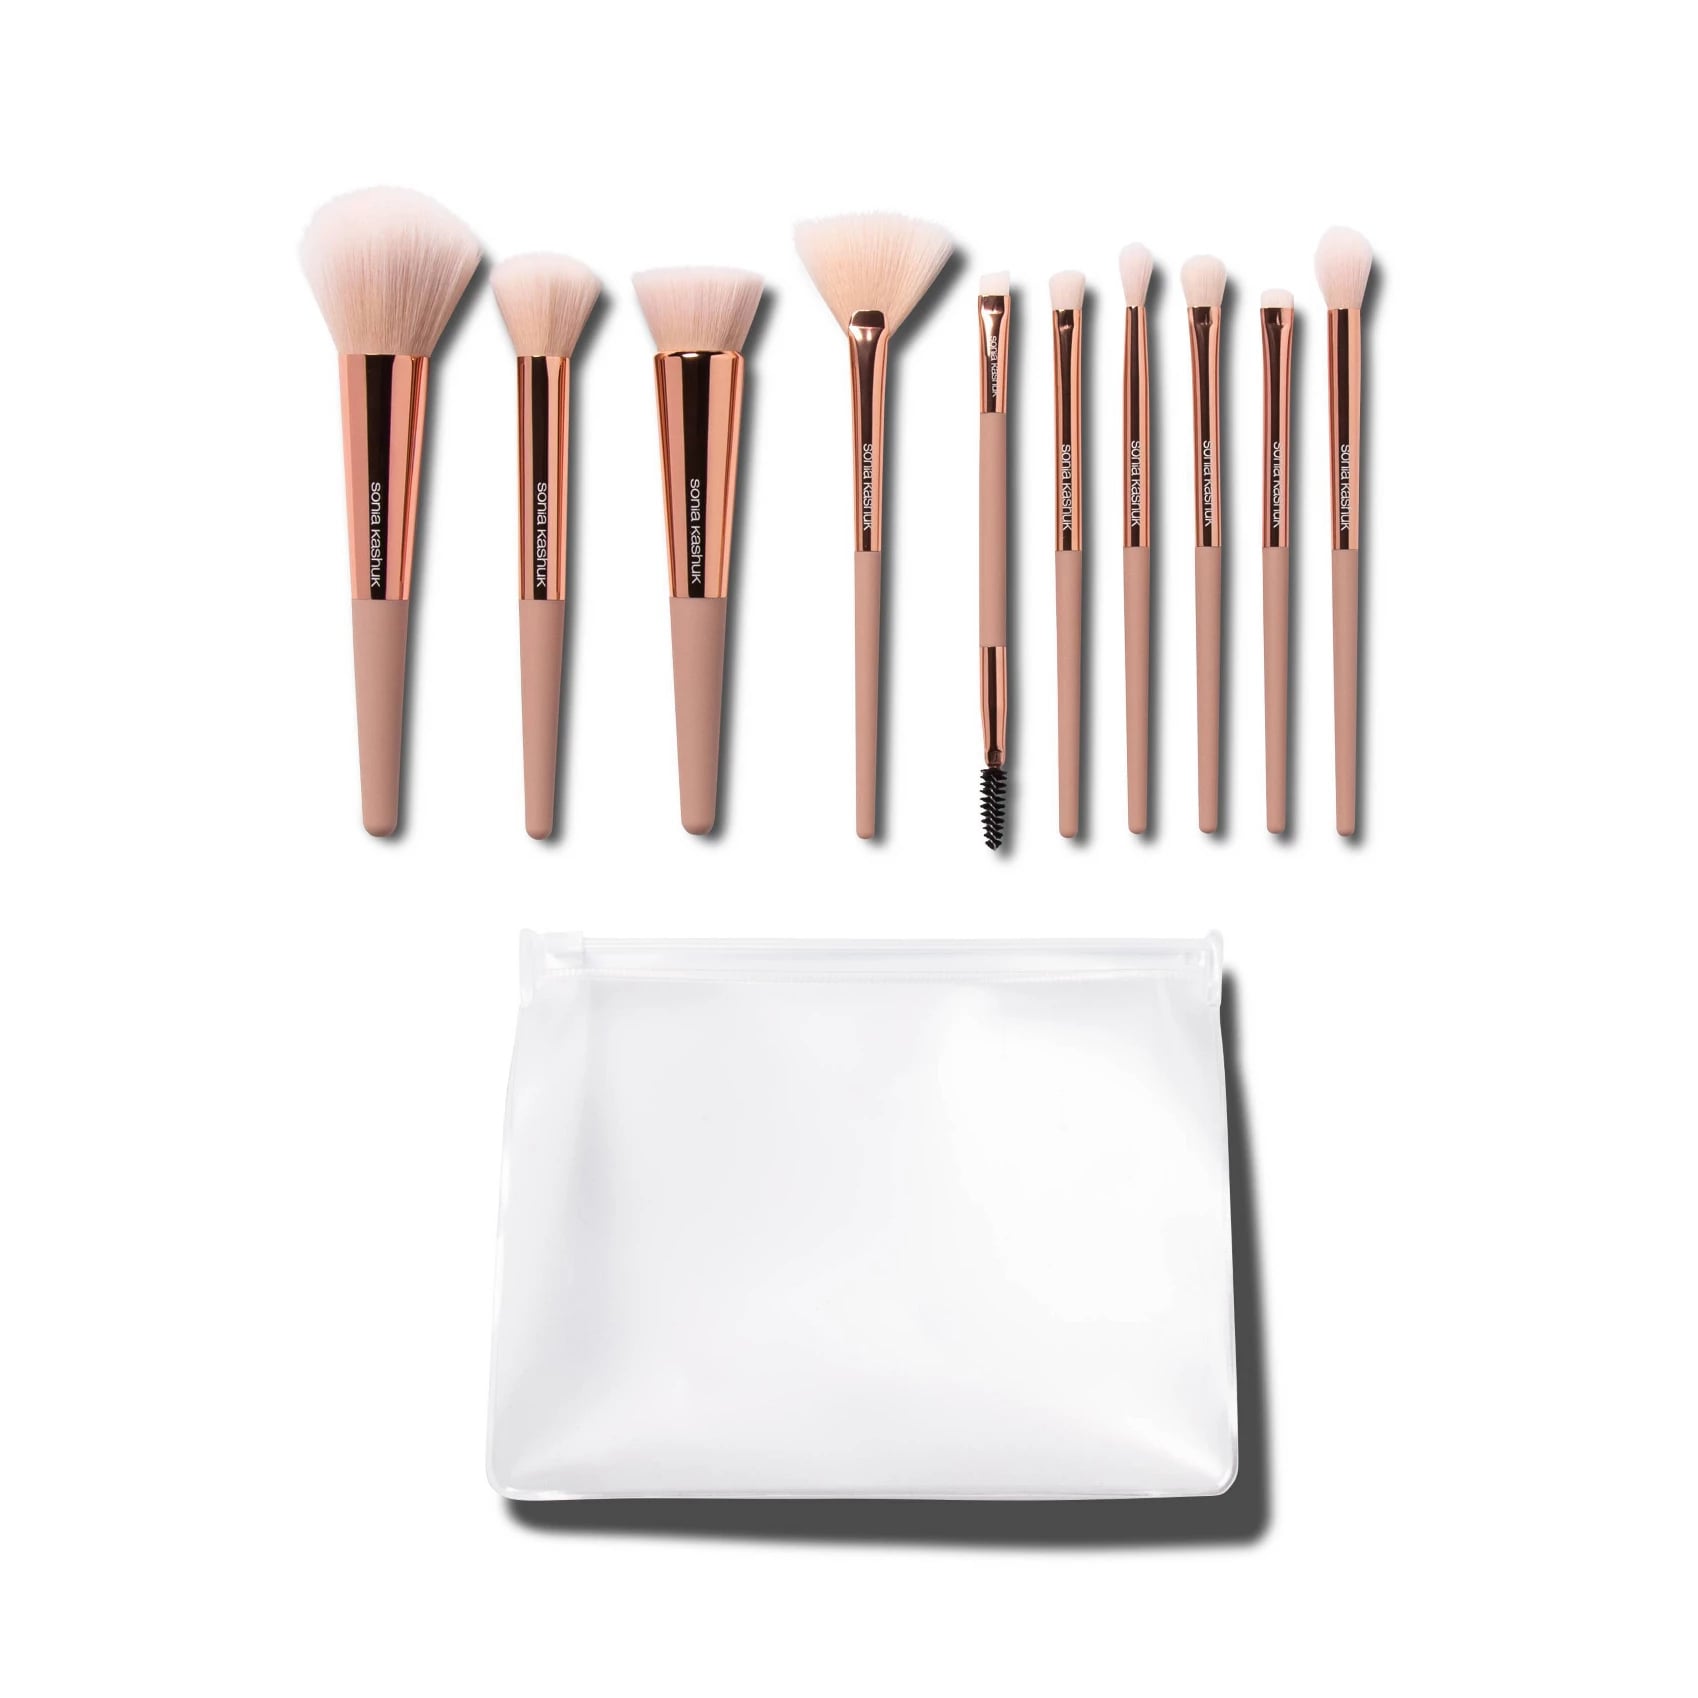 March 18: Sonia Kashuk Complete Brush Set